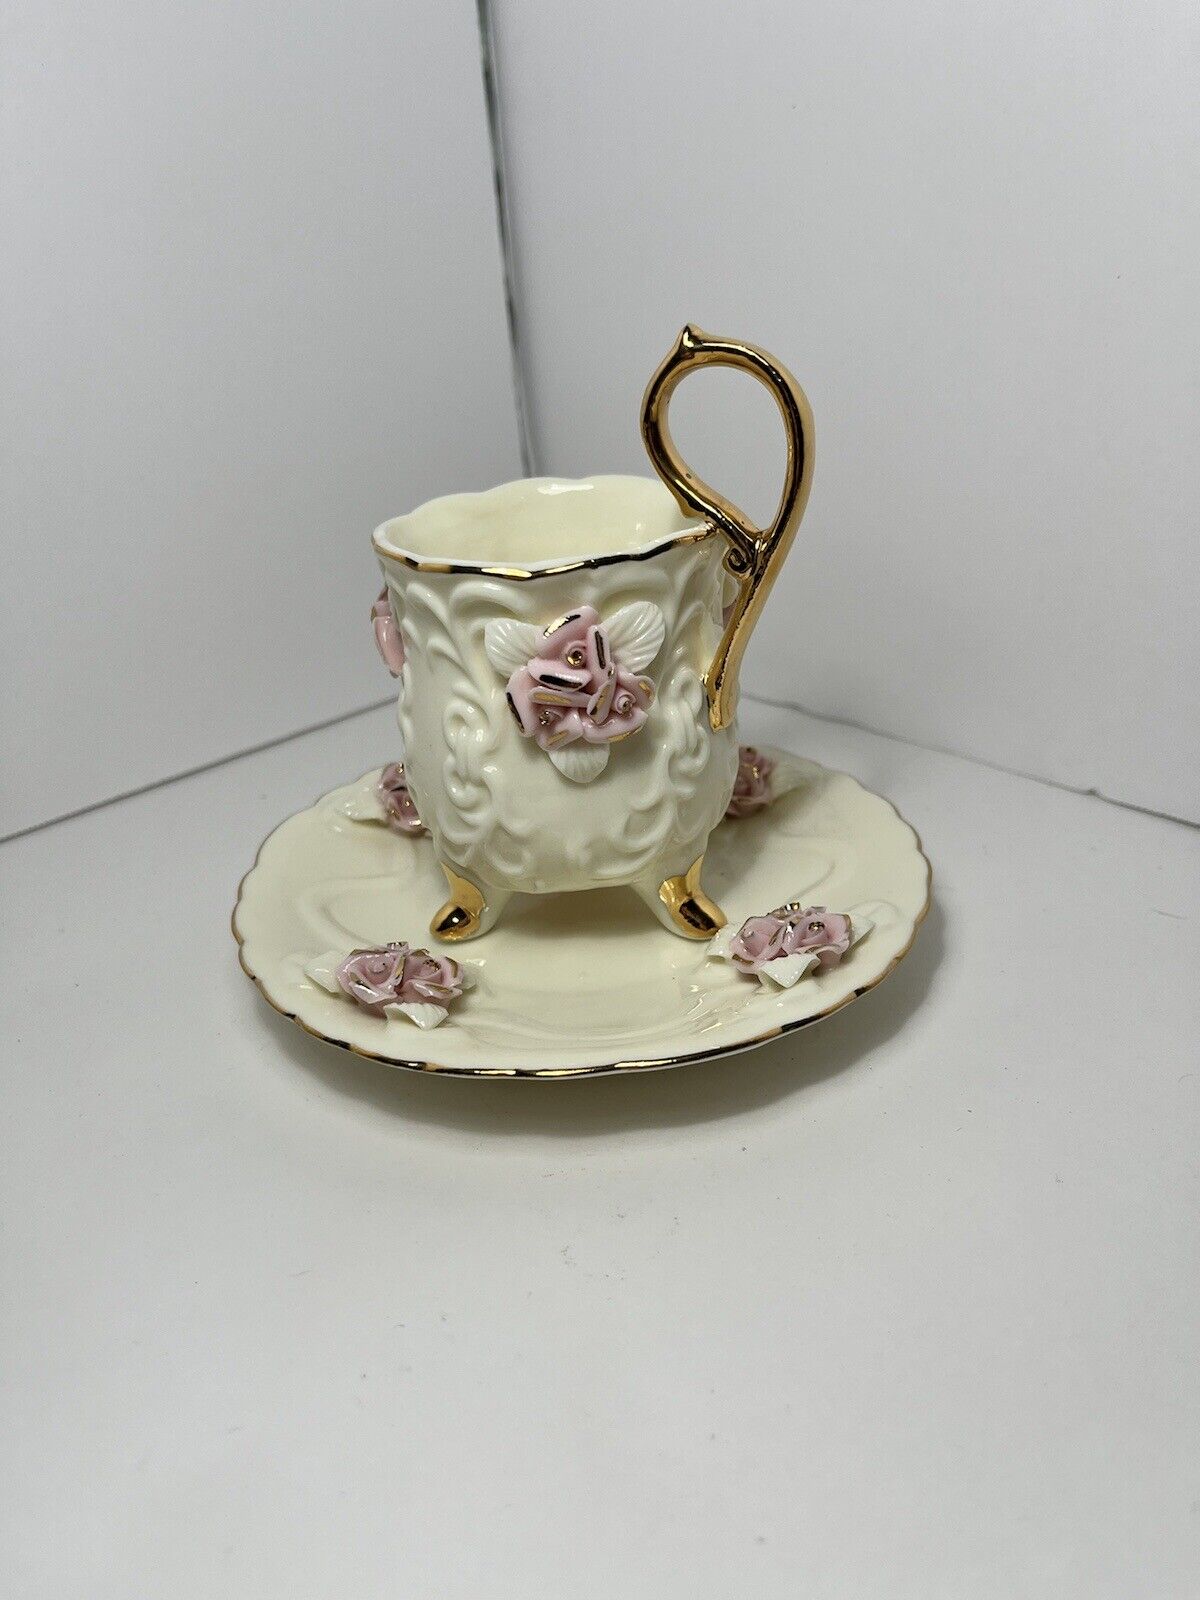 3D Teacup and Saucer Victorian Style Ivory Color Pink Rosette and Gold Tone Trim